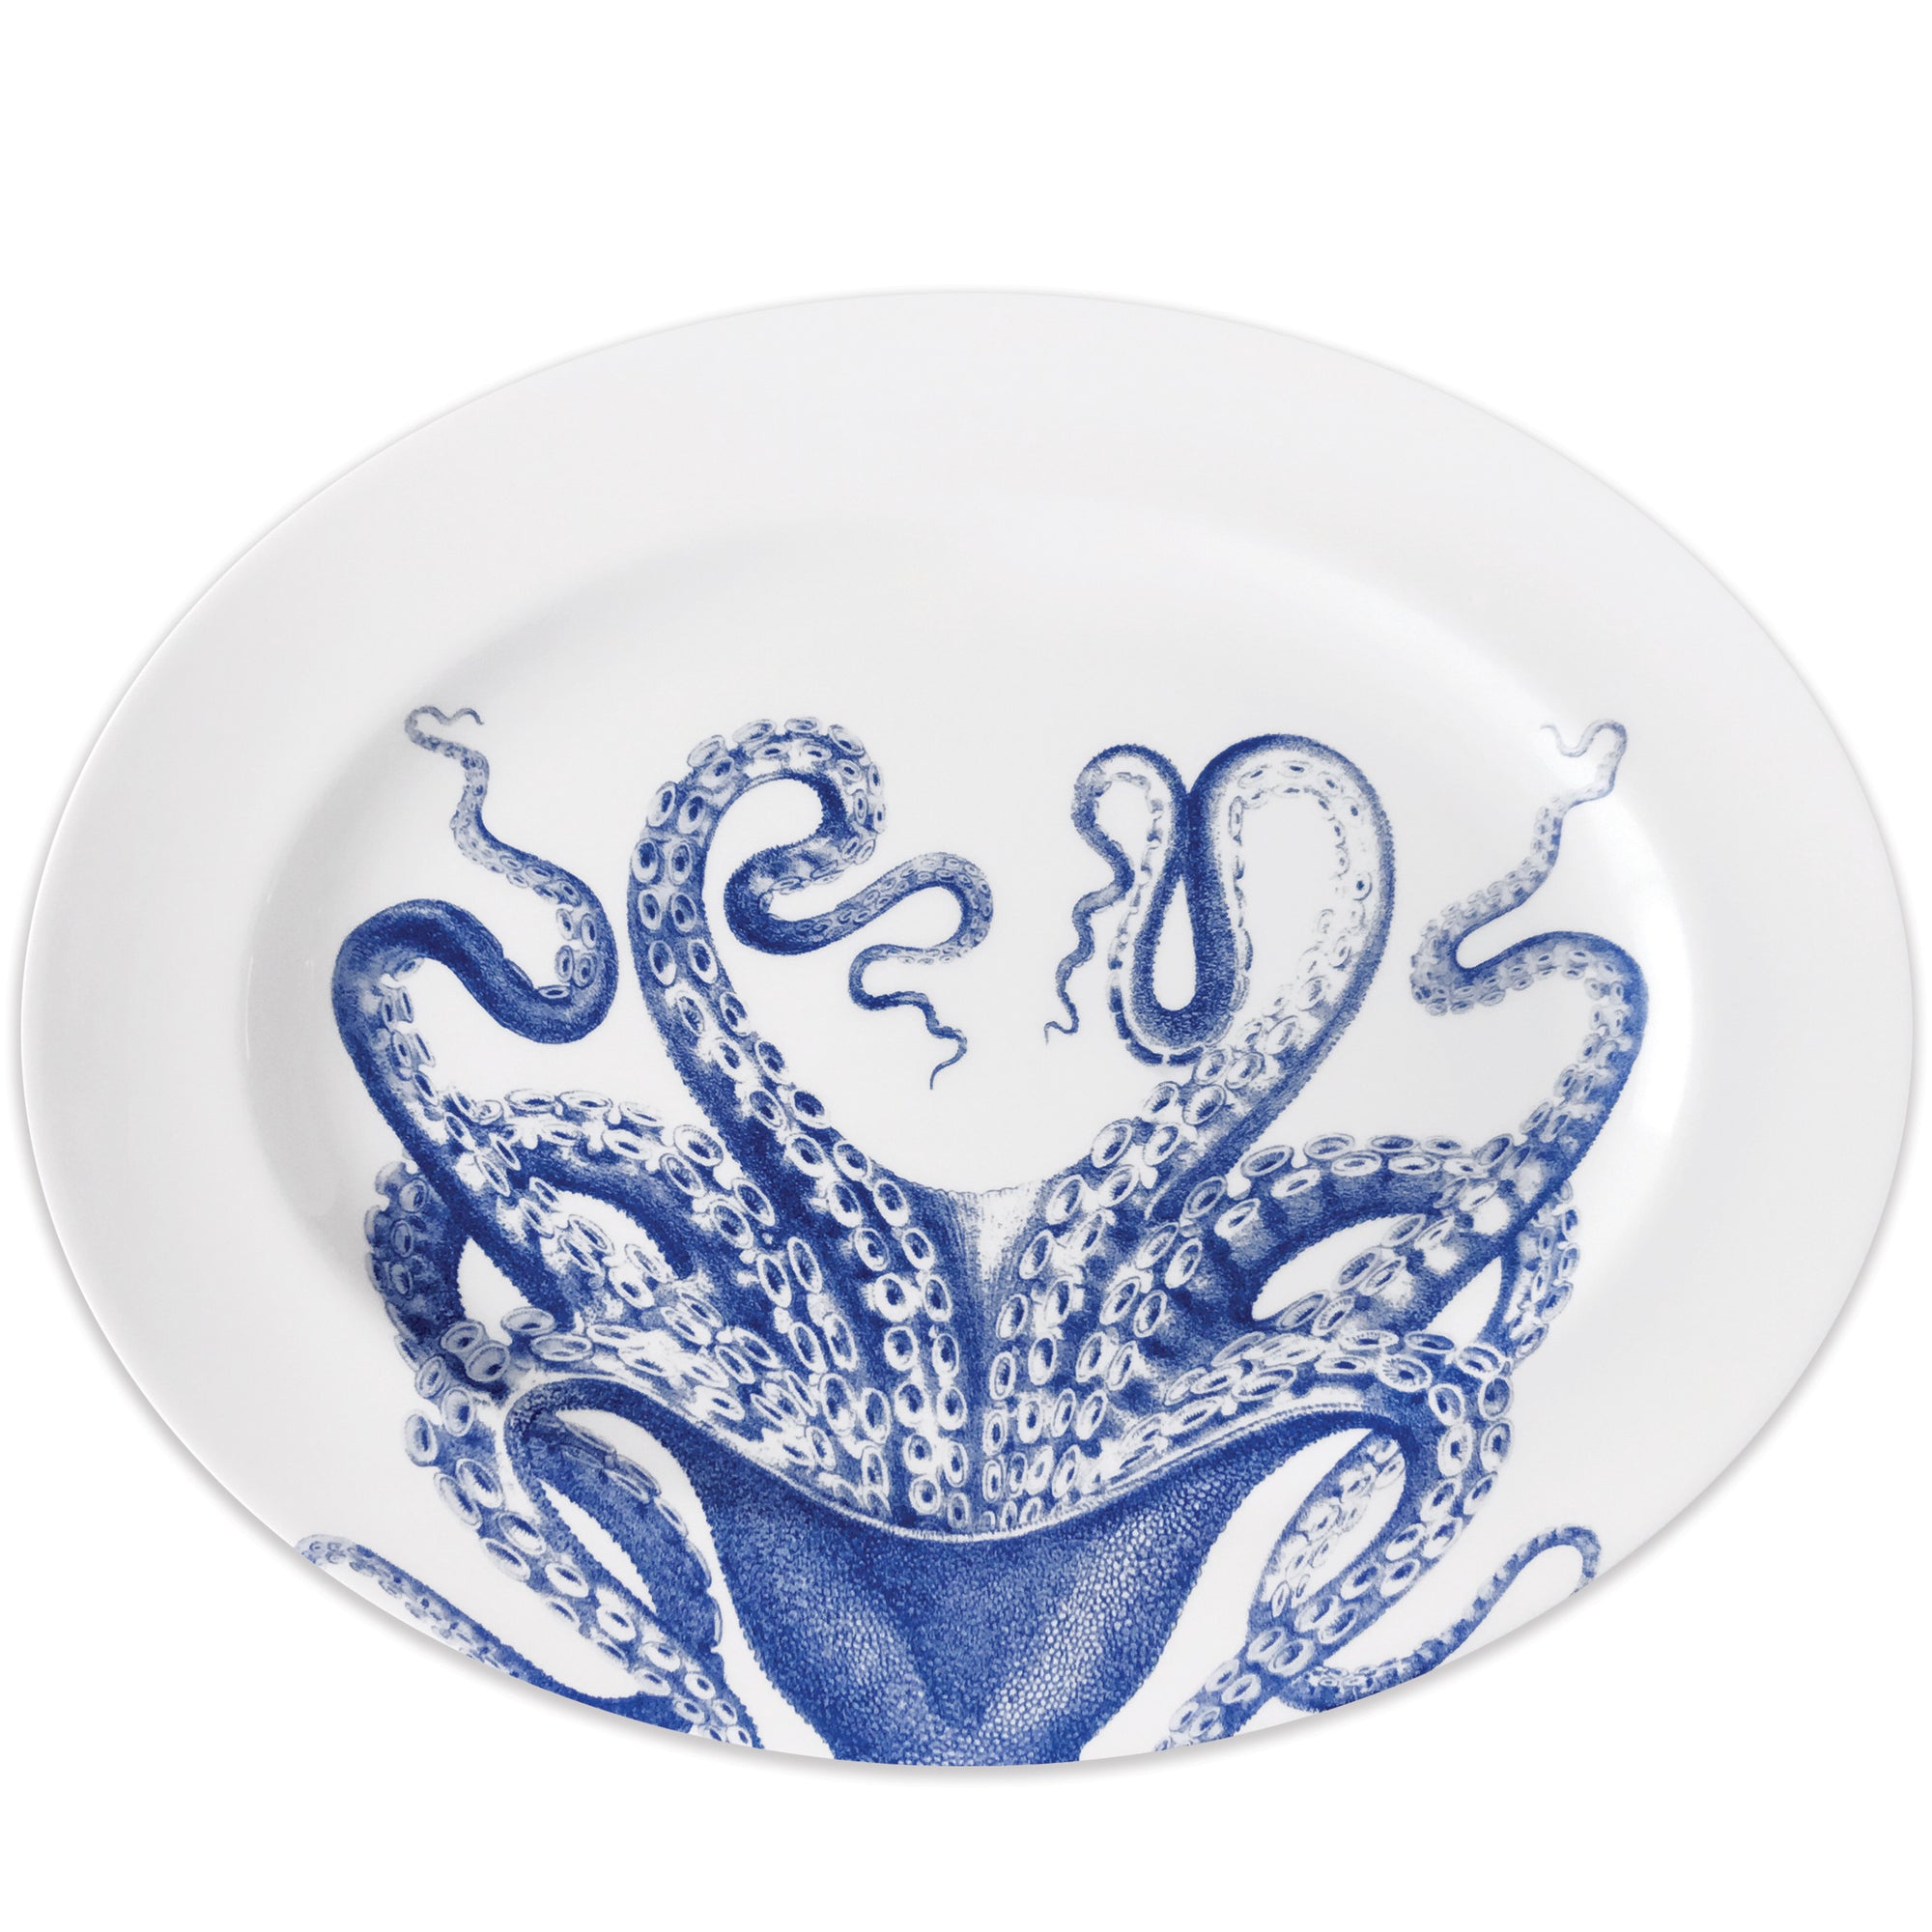 A creamy white Lucy Oval Rimmed Platter by Caskata Artisanal Home featuring a blue illustration of an octopus at the center, its tentacles extending outward towards the edges of this elegant high-fired porcelain piece.